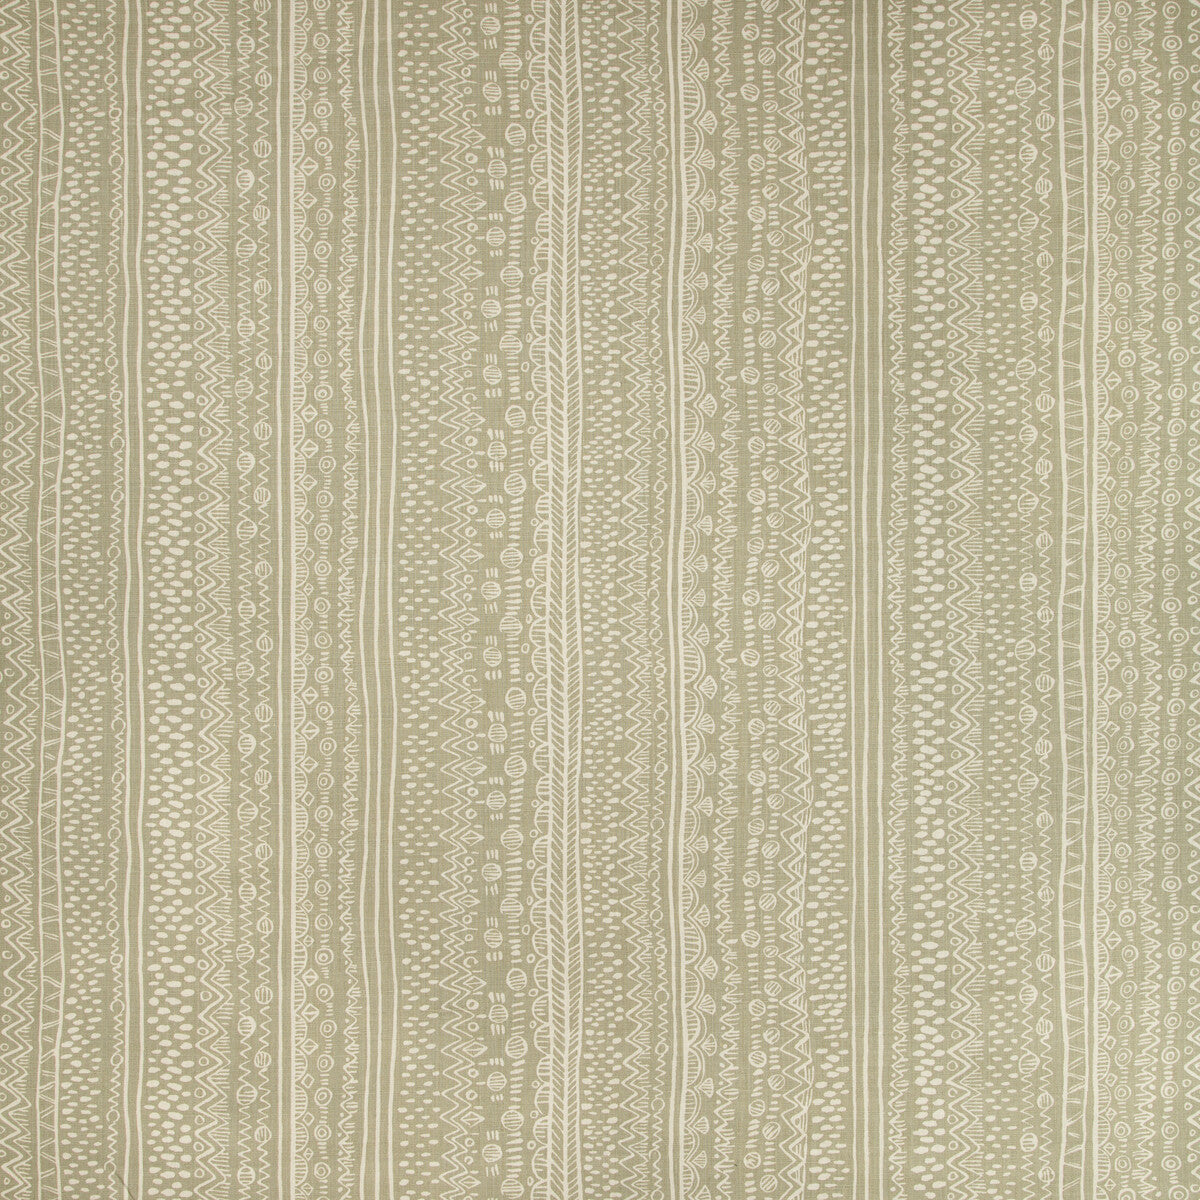 Kirby fabric in dove color - pattern BFC-3668.106.0 - by Lee Jofa in the Blithfield collection